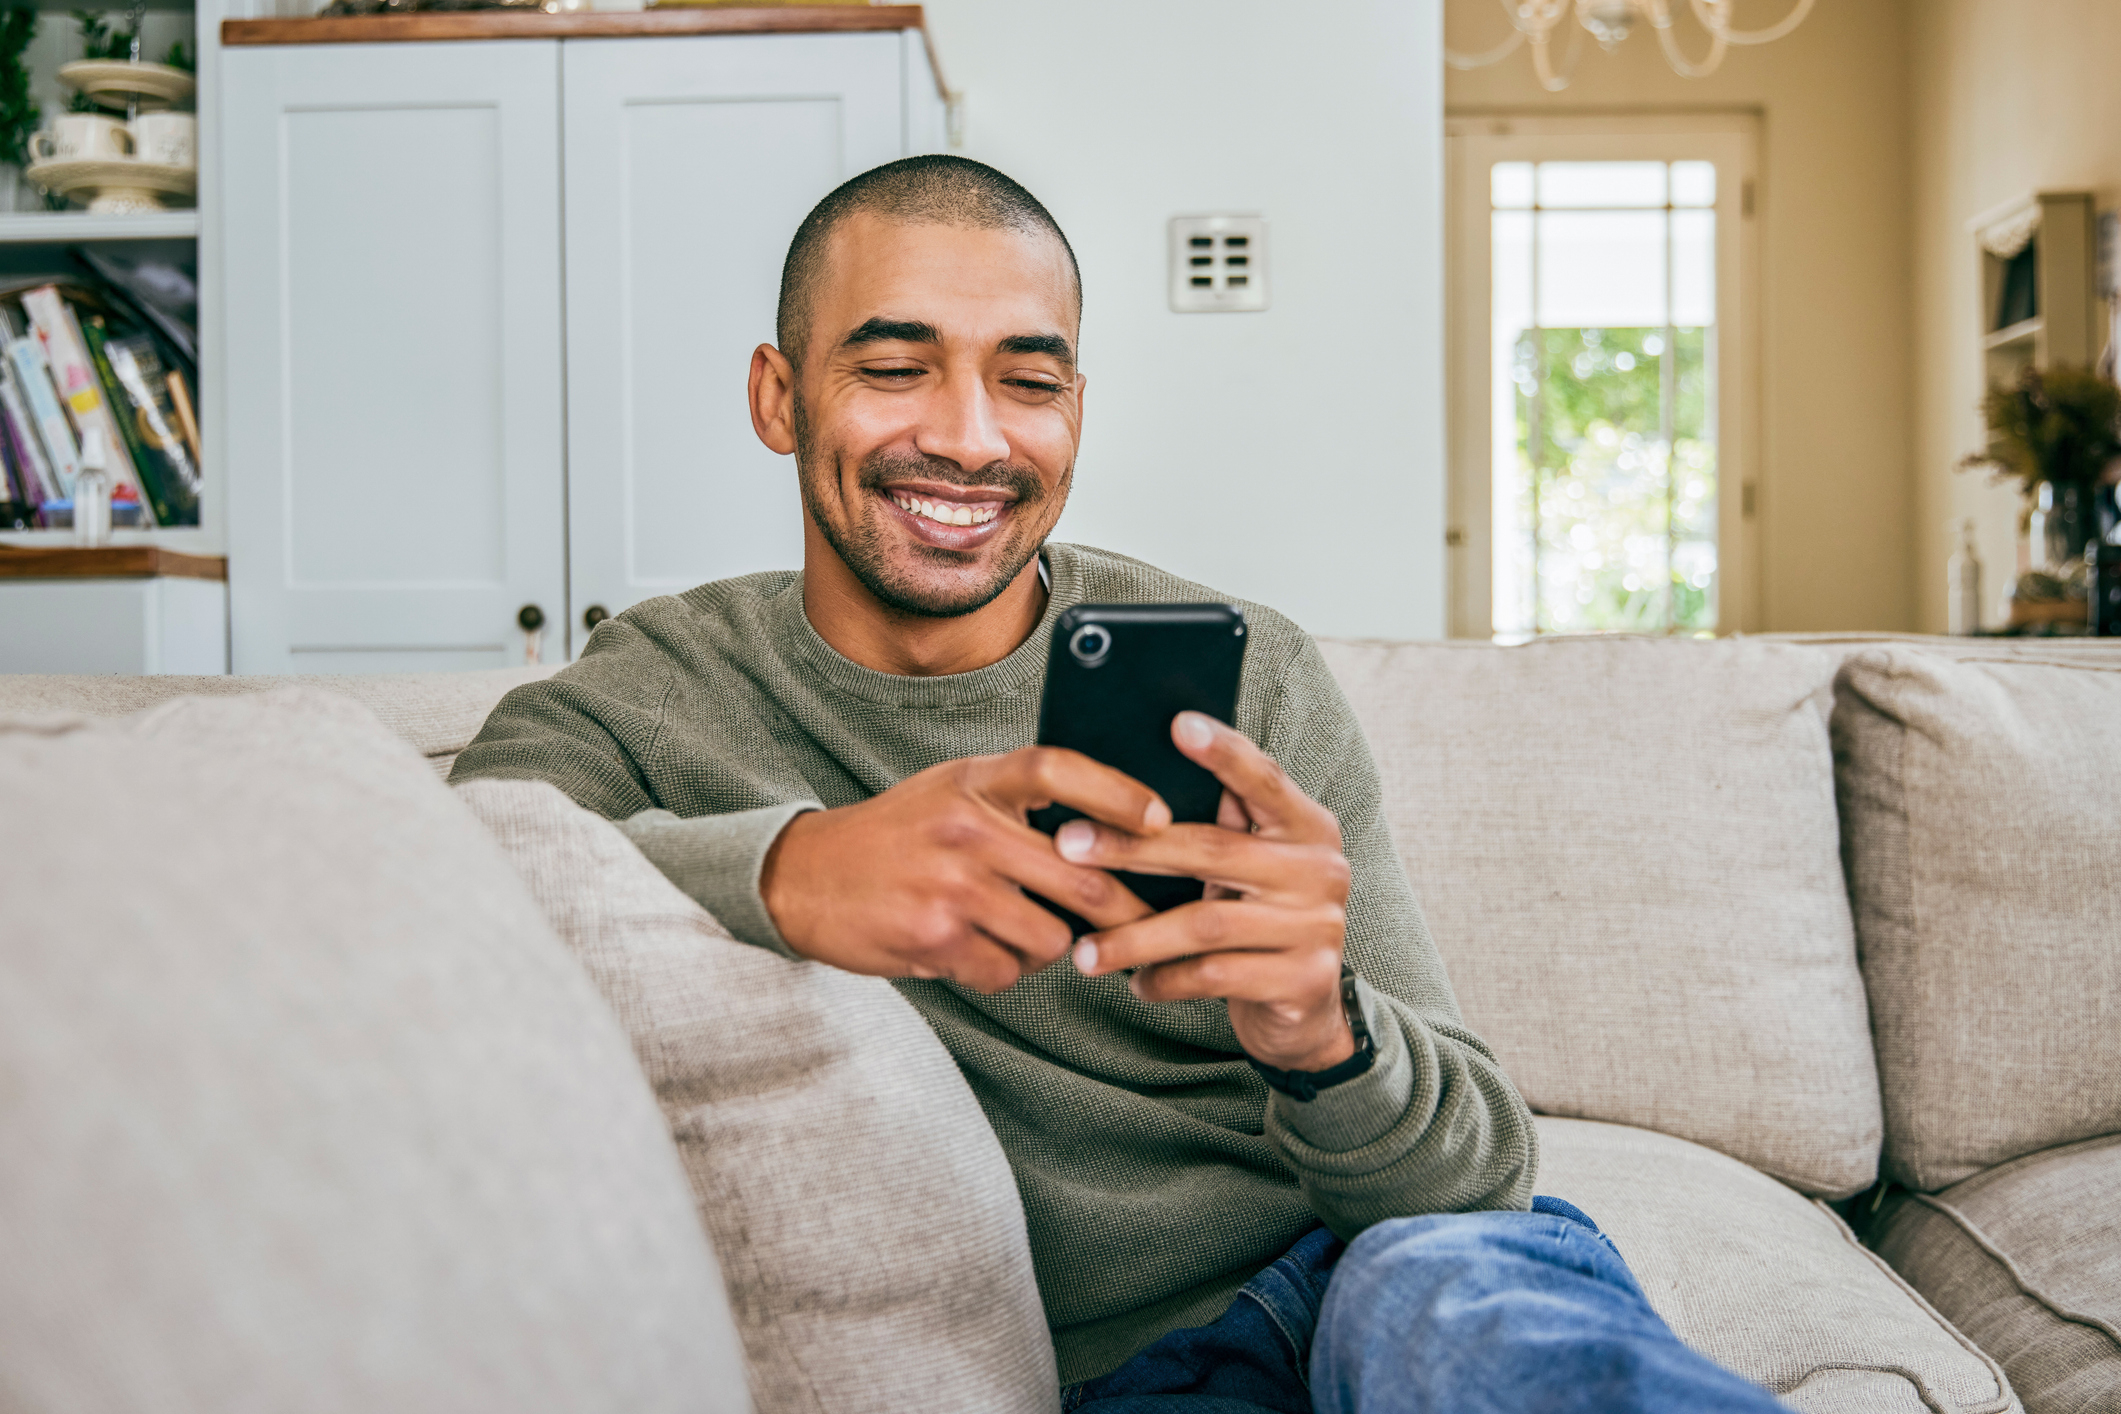 Man on couch smiling at his smartphone, possibly managing finances or remote working